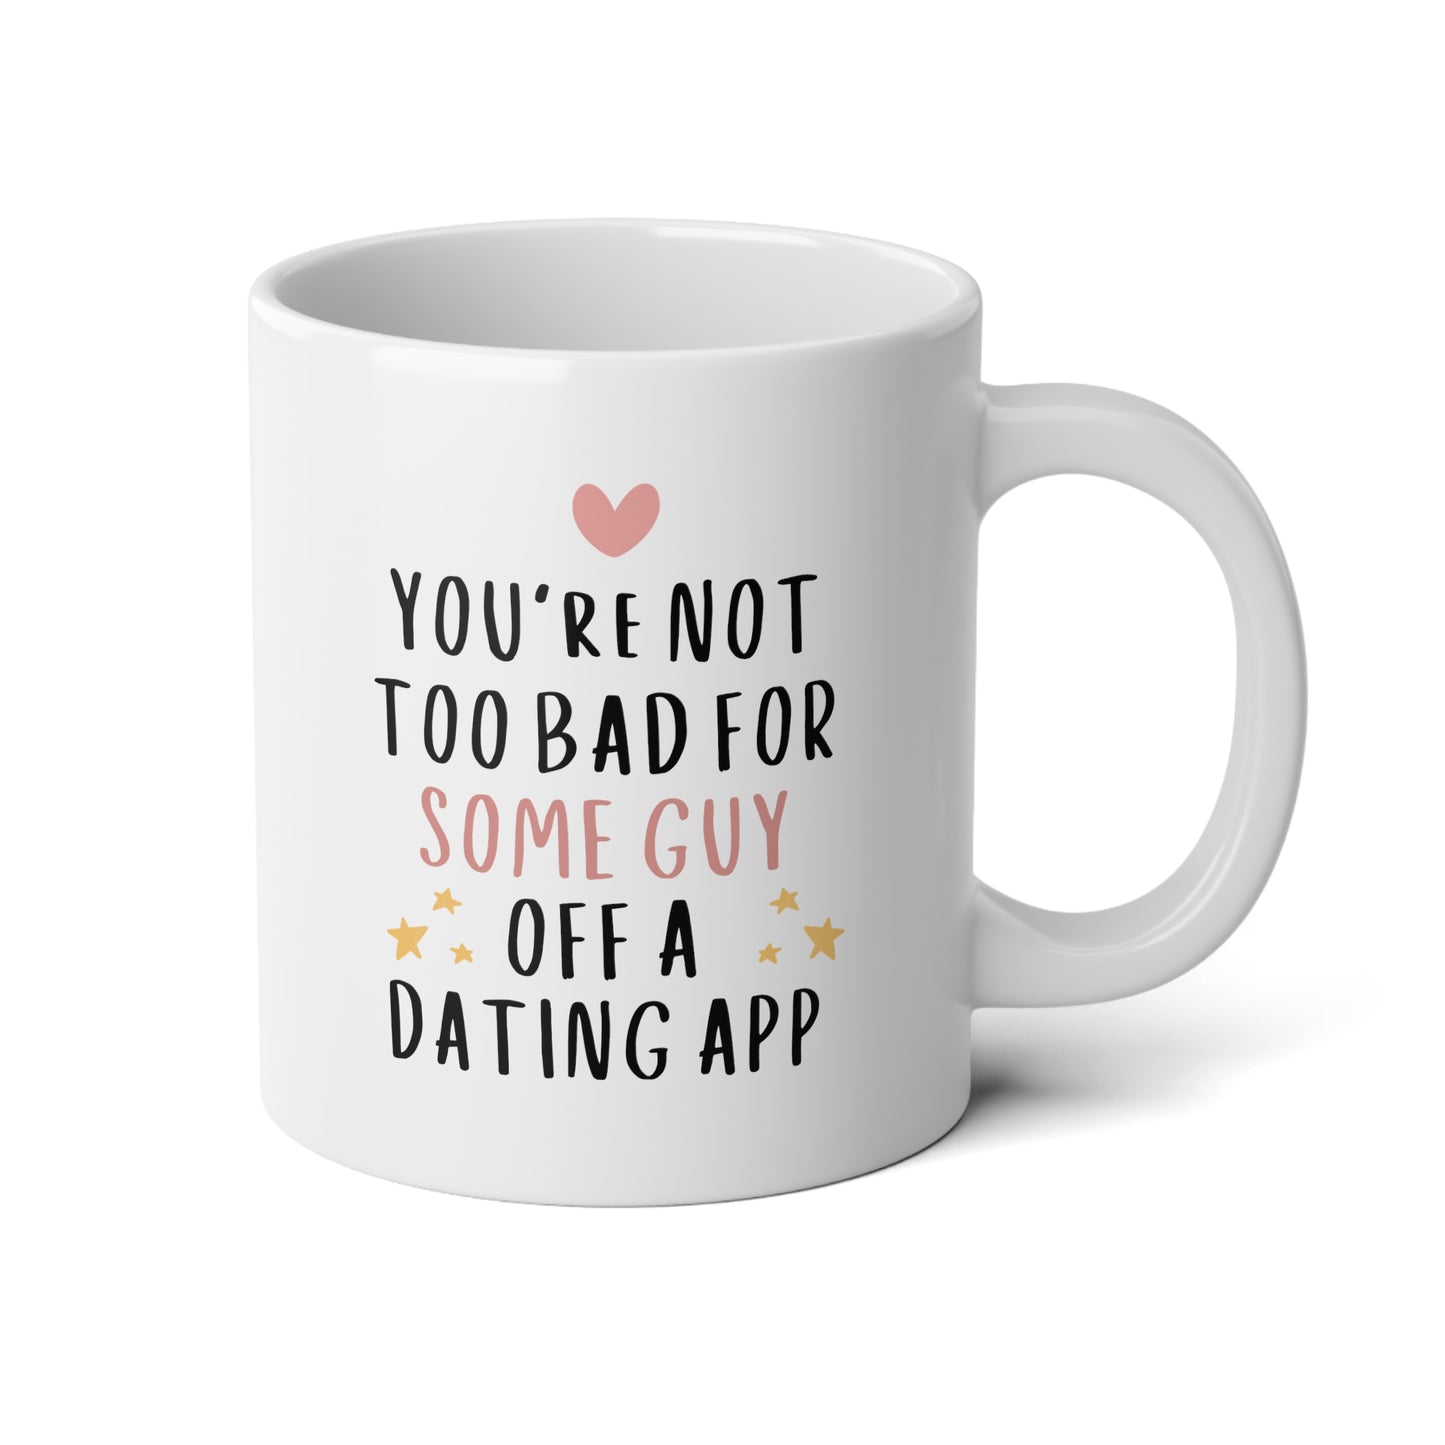 You're Not Too Bad For Some Guy Off A Dating App 20oz white funny large coffee mug gift for boyfriend valentine's day him husband fiance anniversary internet from girlfriend wife waveywares wavey wares wavywares wavy wares